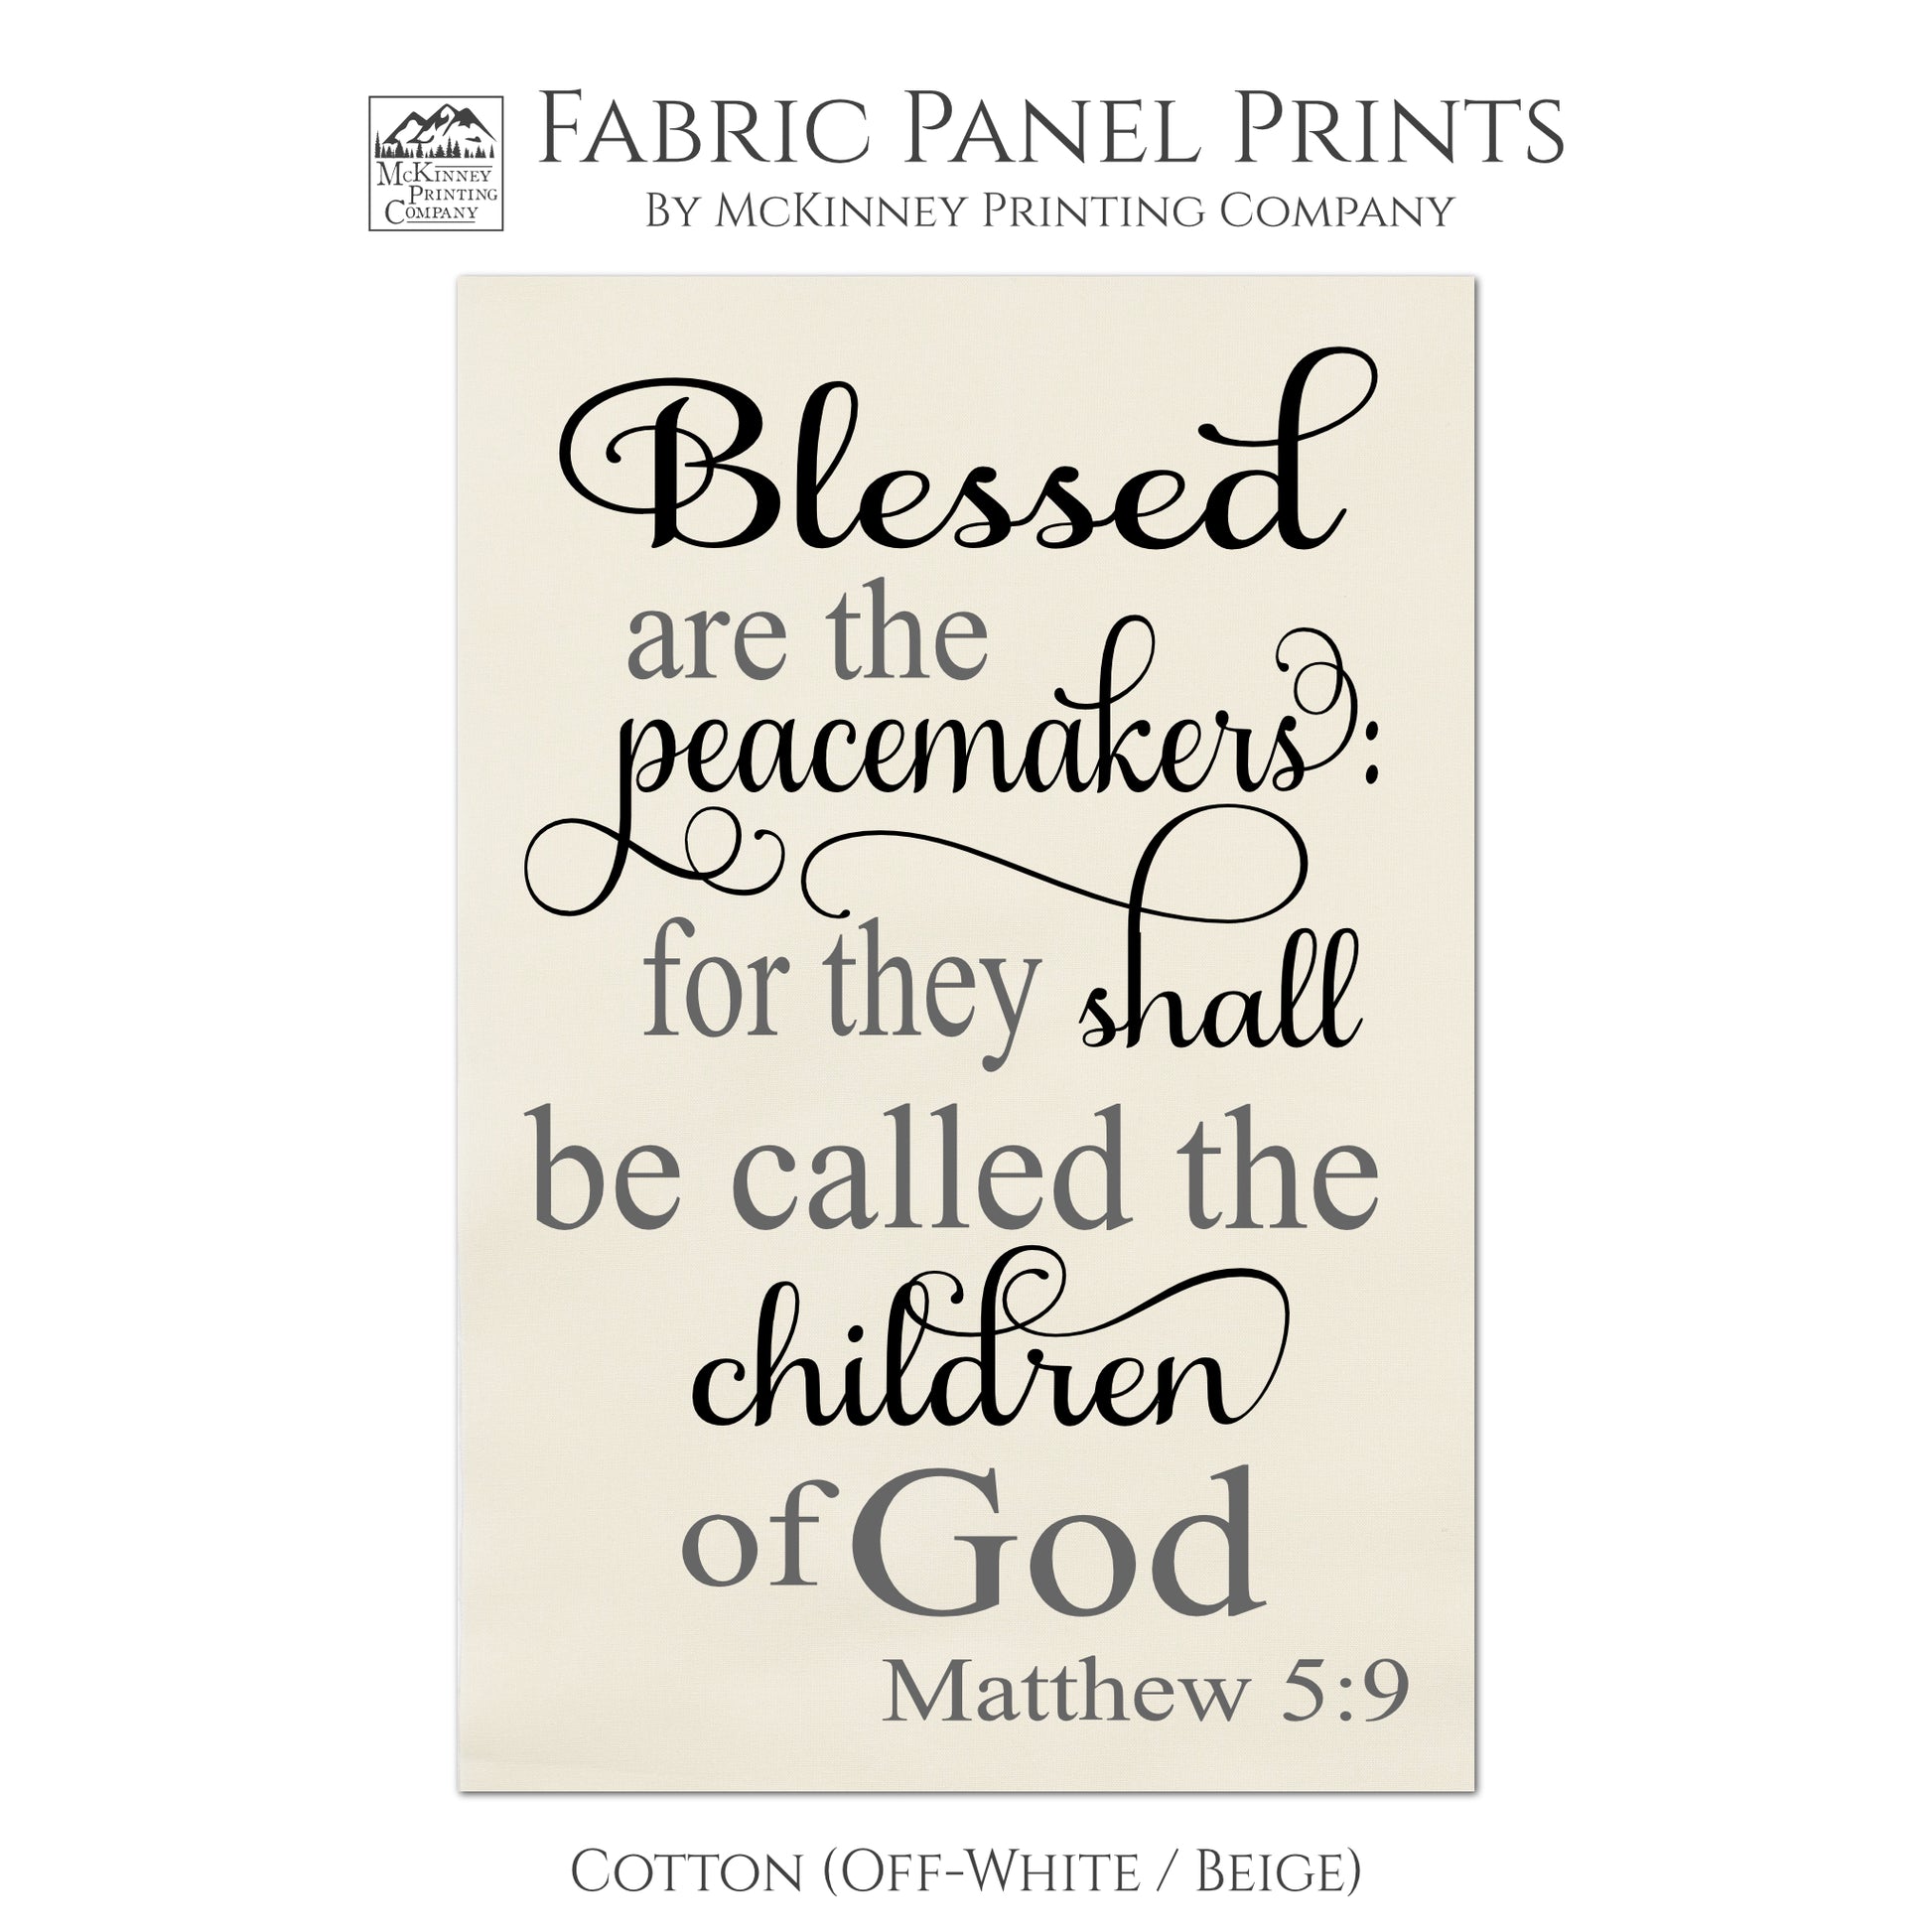 Blessed are the peacemakers: for they shall be called the children of God. - Matthew 5 9, Scripture Fabric, Quilt Block, Religious Fabric - Cotton